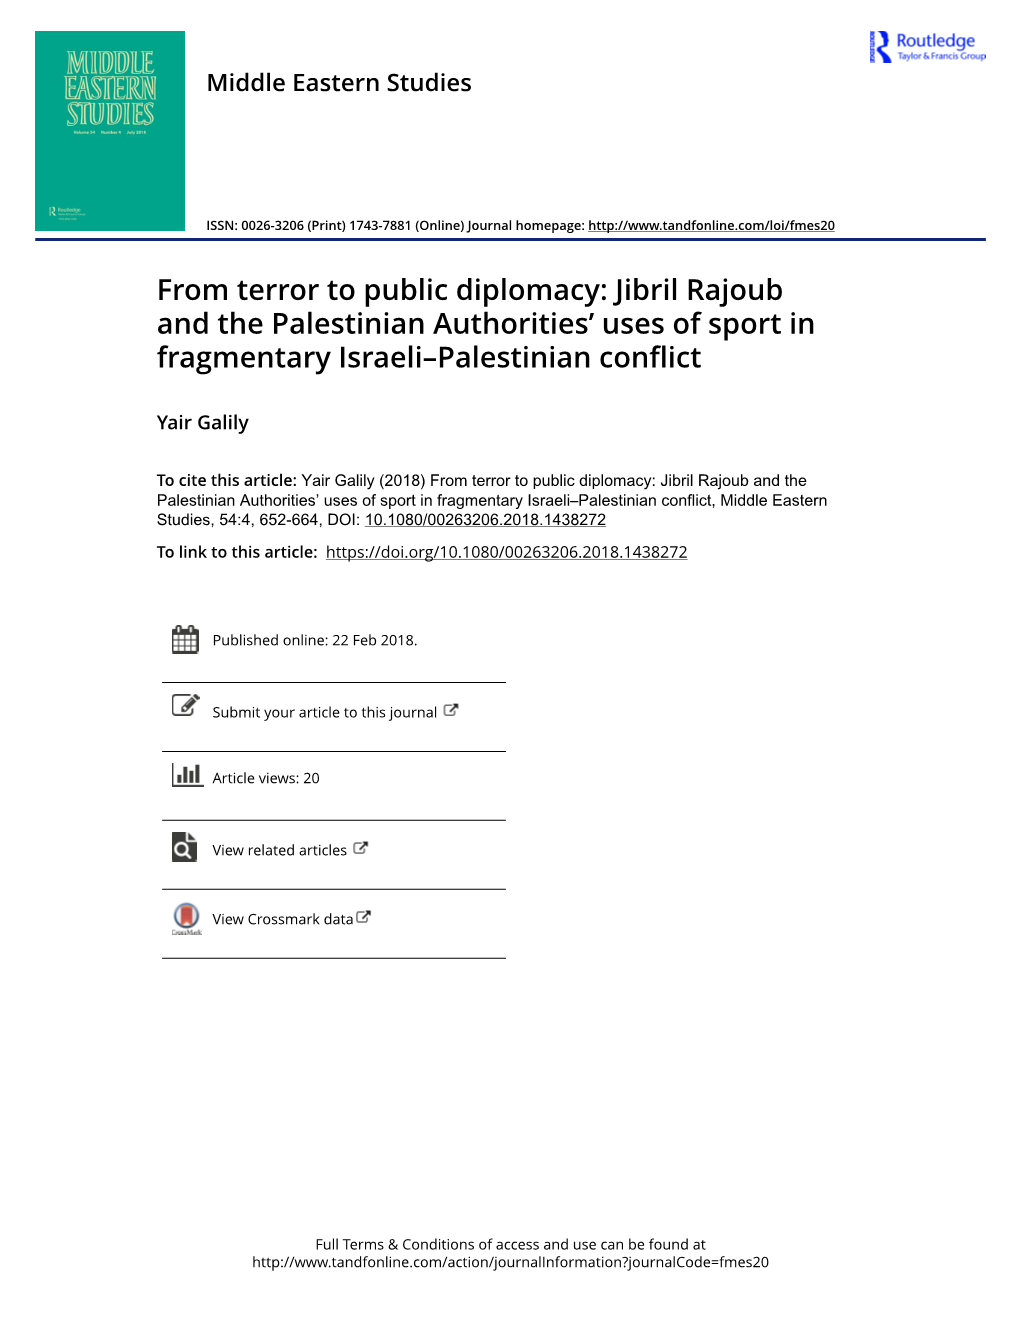 From Terror to Public Diplomacy: Jibril Rajoub and the Palestinian Authorities’ Uses of Sport in Fragmentary Israeli–Palestinian Conflict